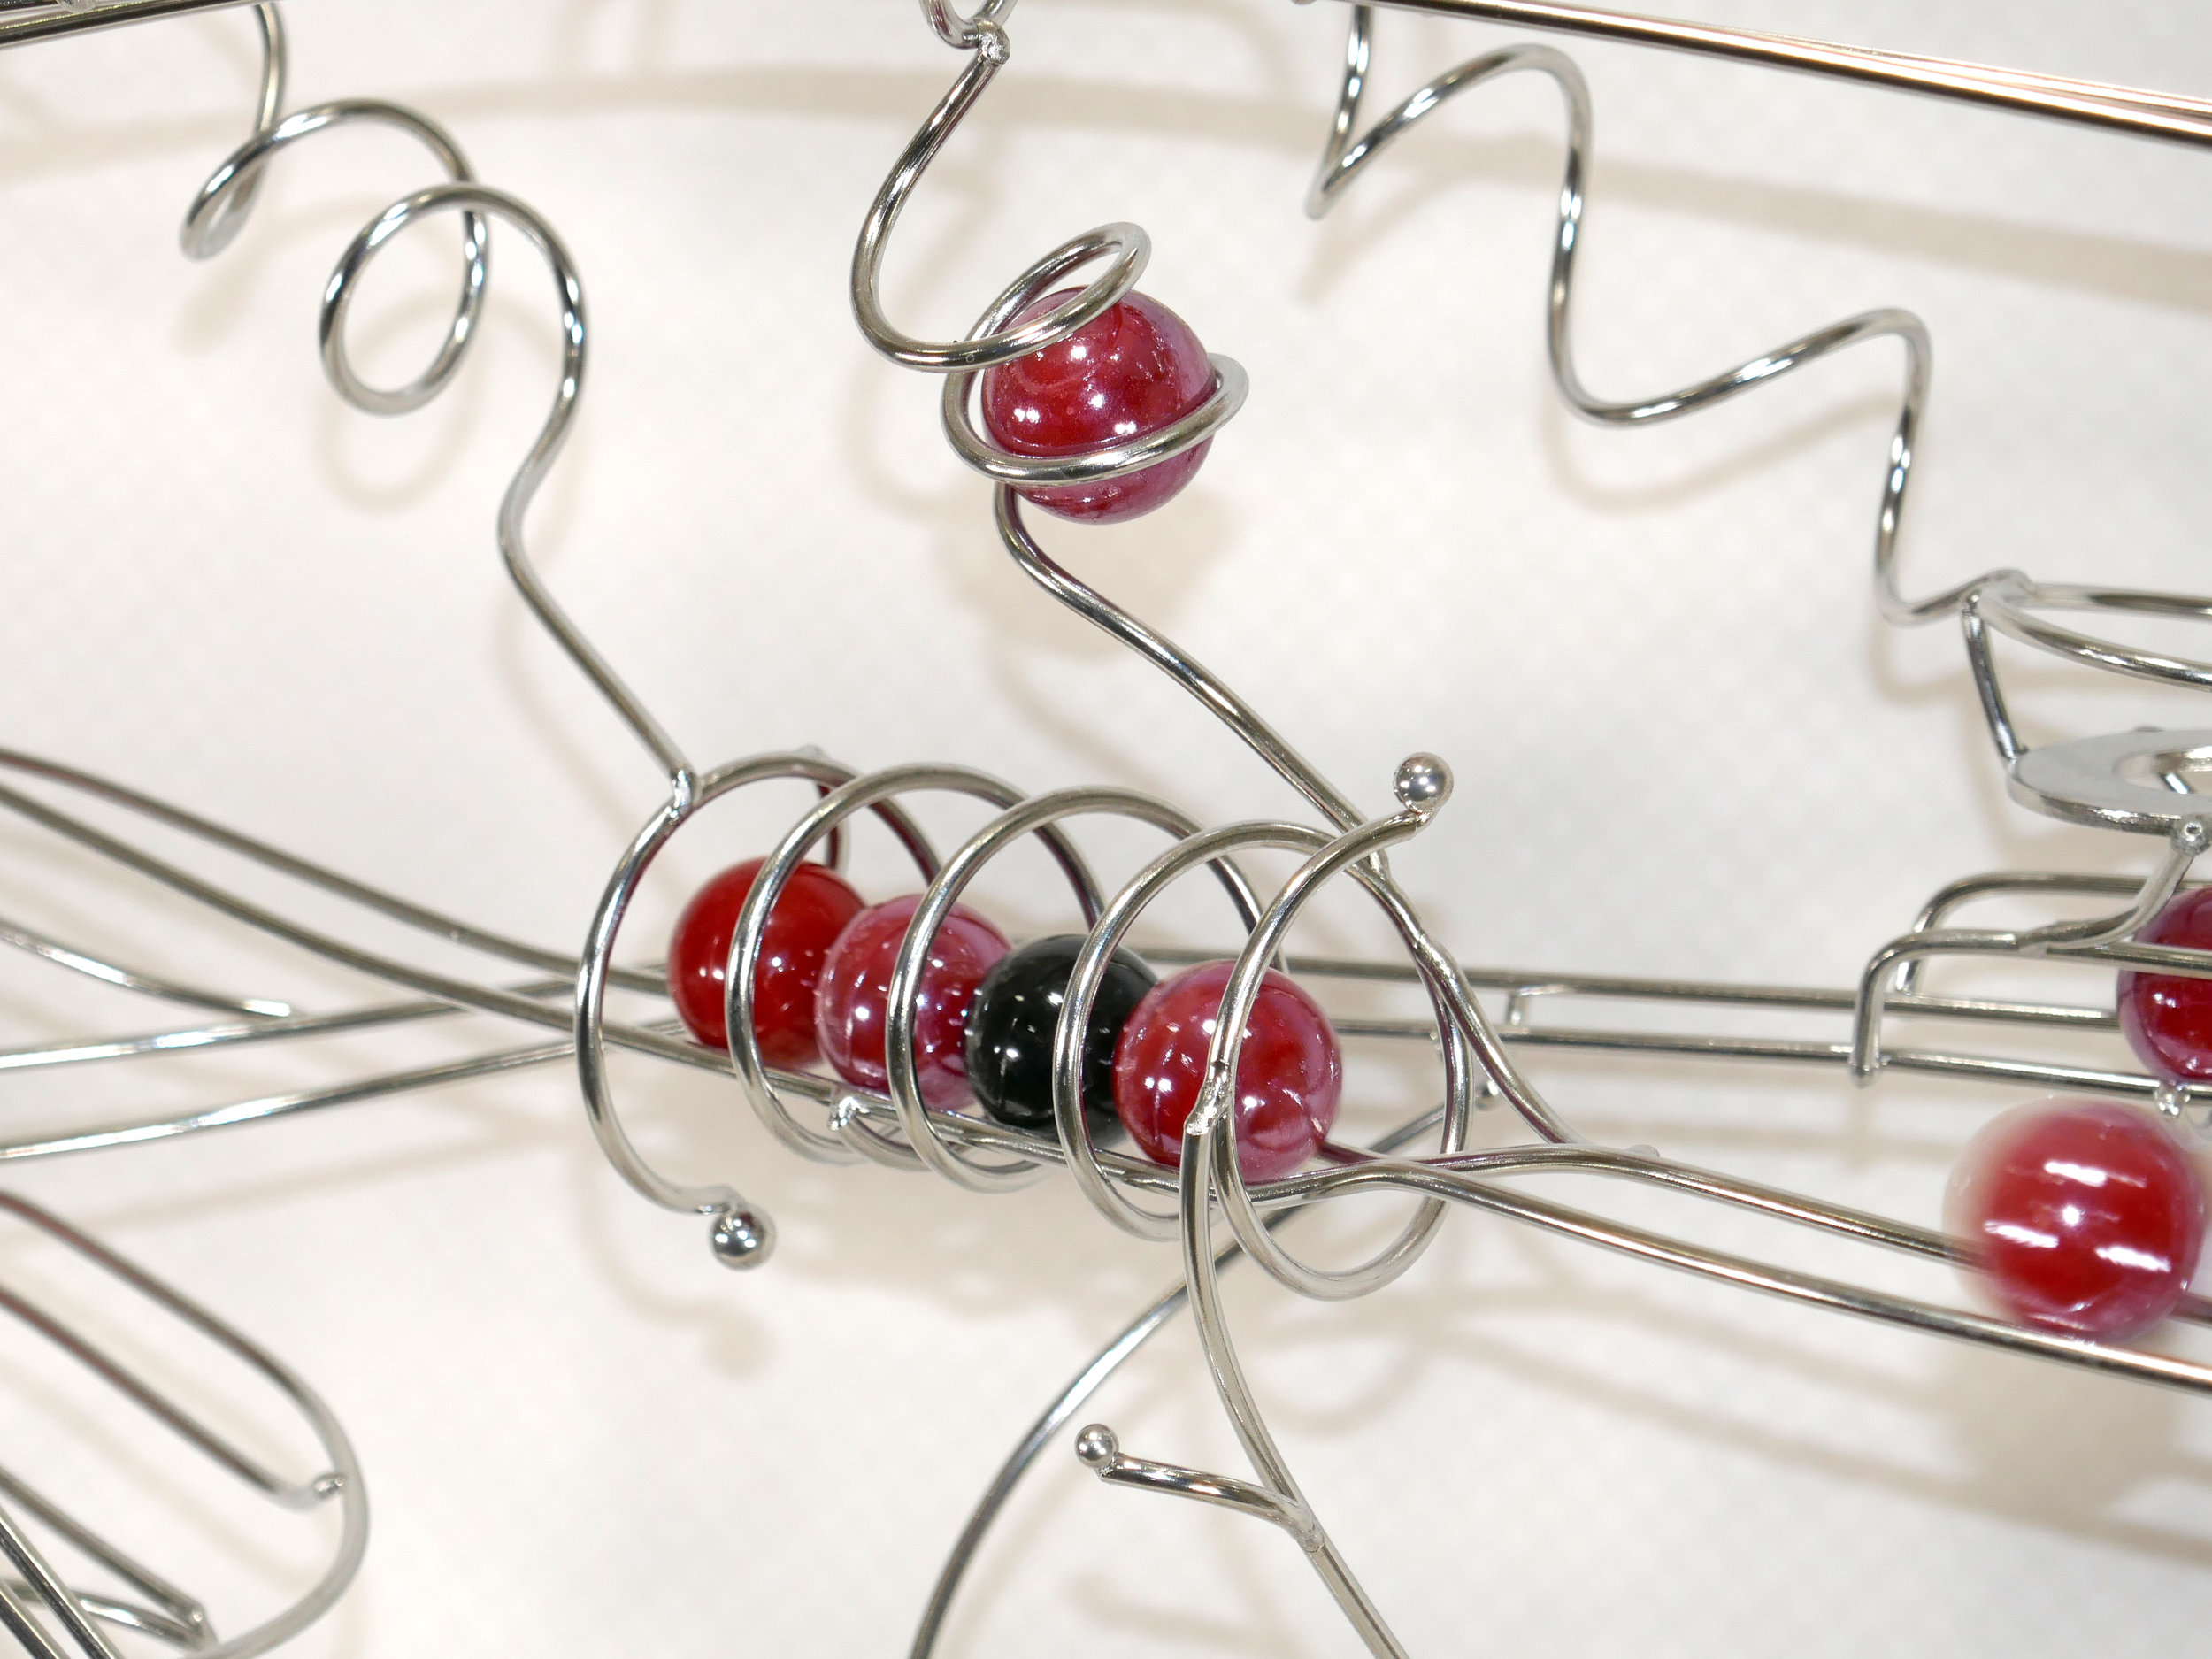 Rolling ball marble machine - close up of energy transfer kinetic element with red and black marbles